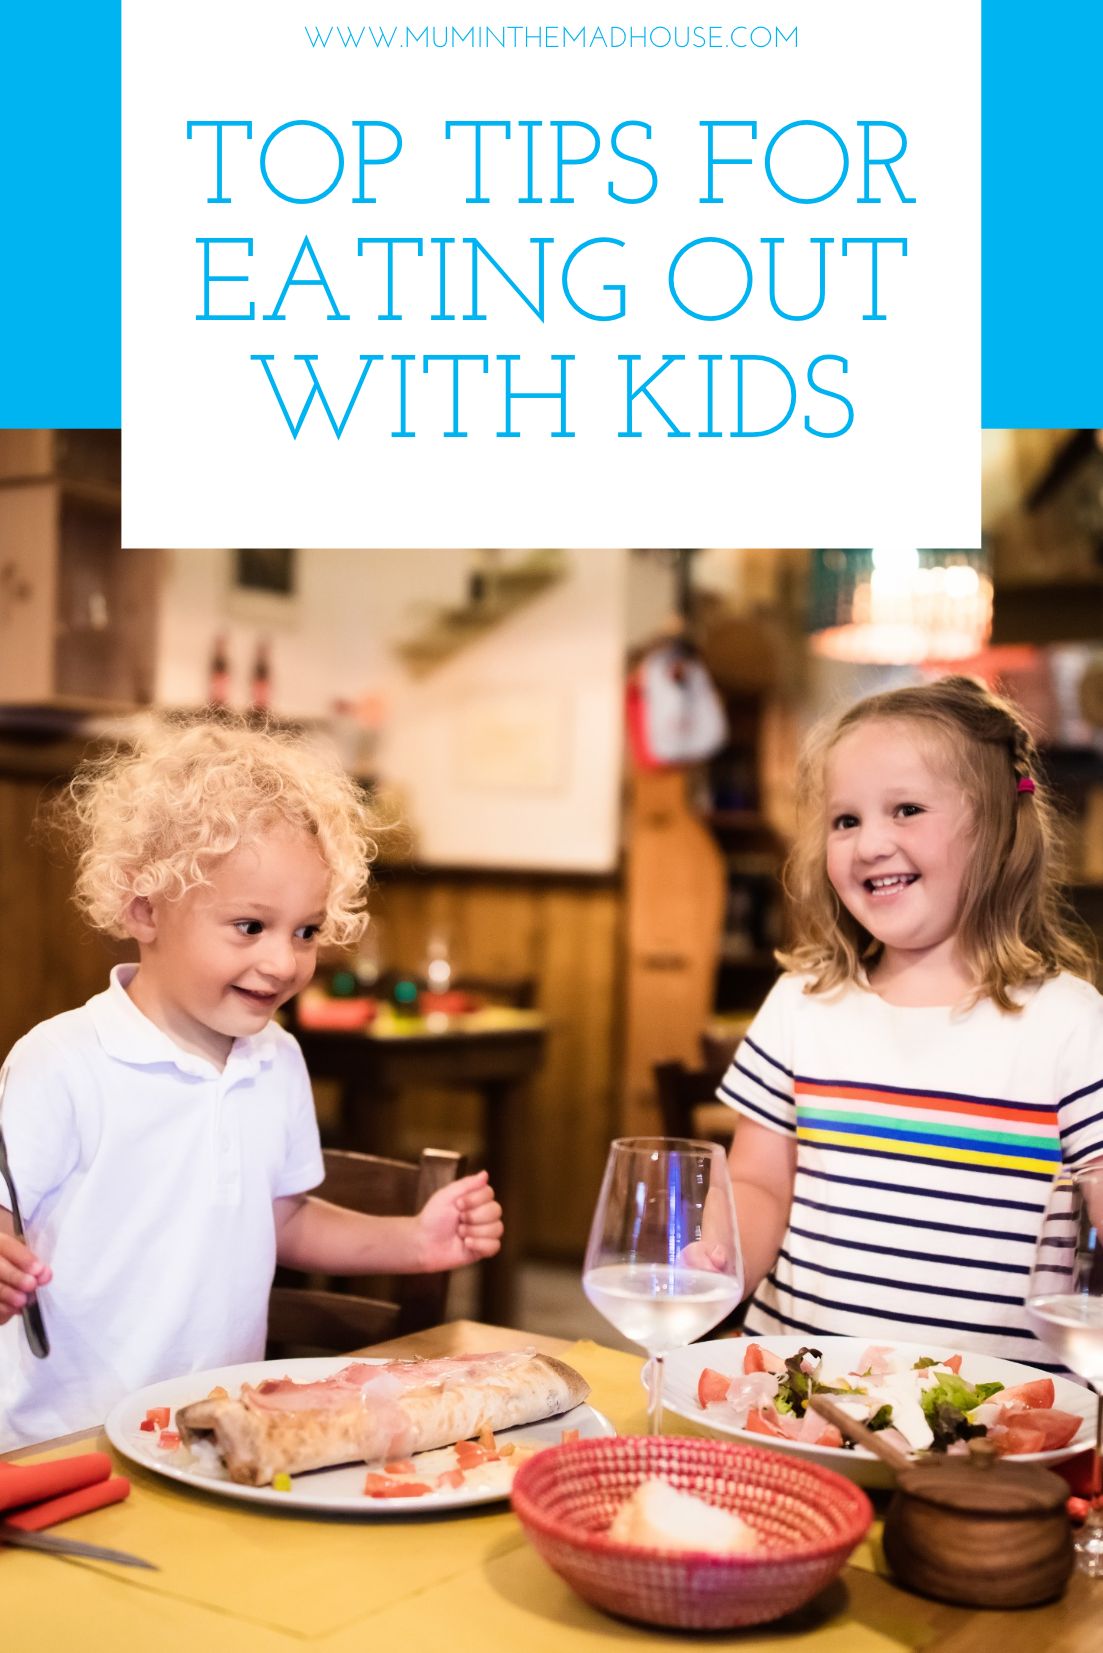 It's not uncommon to live in fear of taking young kids out to eat. I can be a disaster. Here are our top tips for eating out with kids.